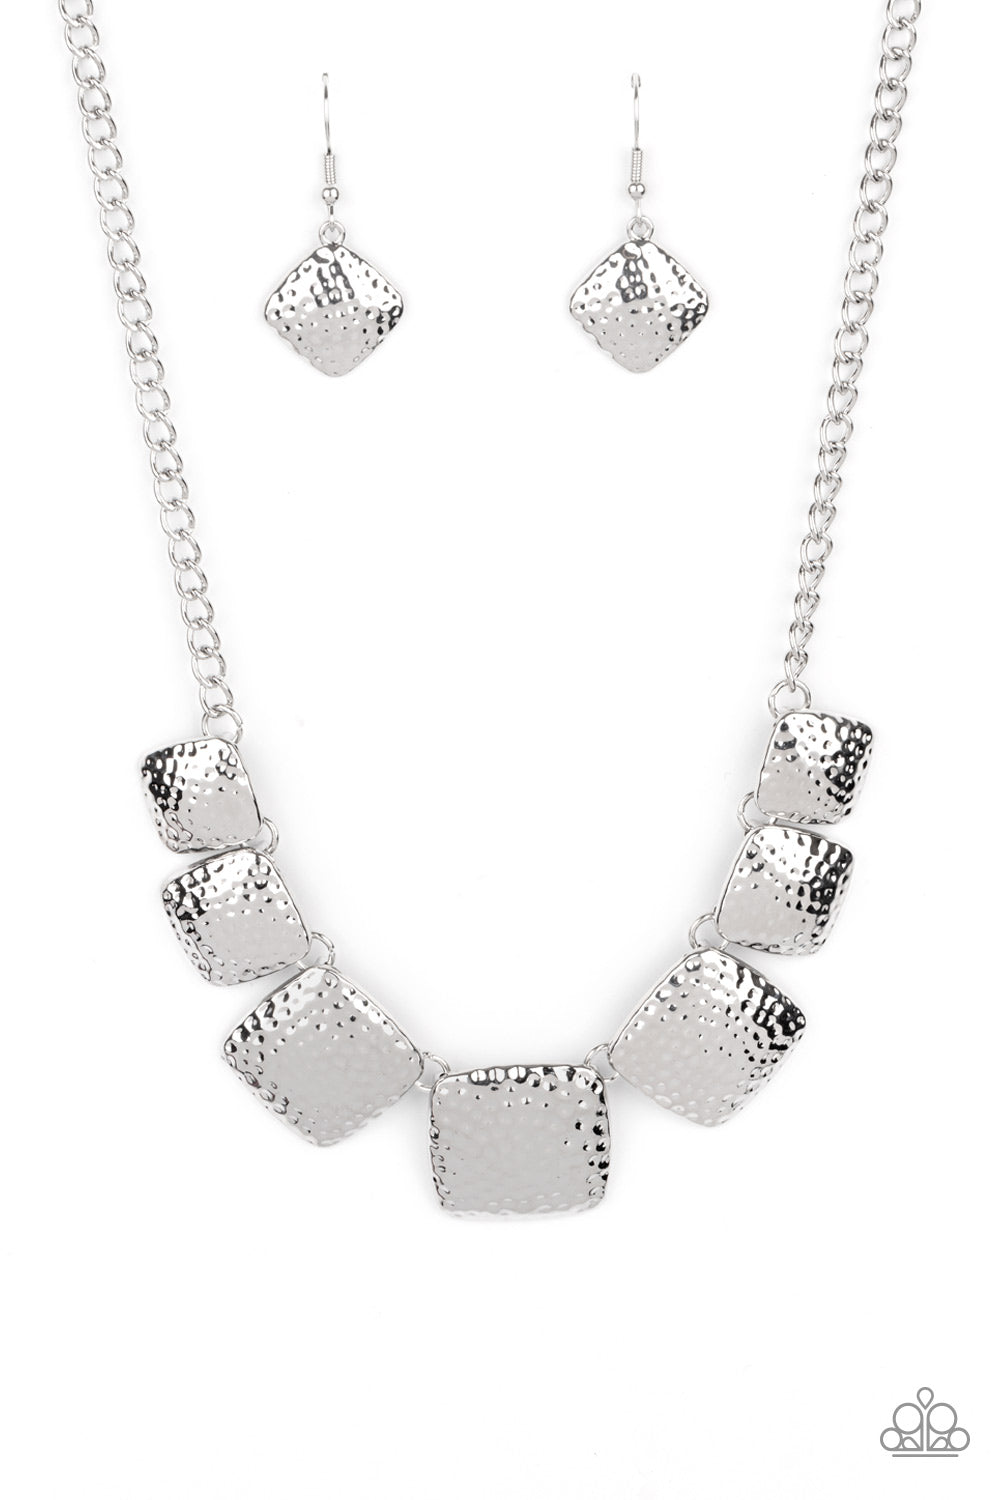 Paparazzi - Keeping It RELIC - Silver Necklace